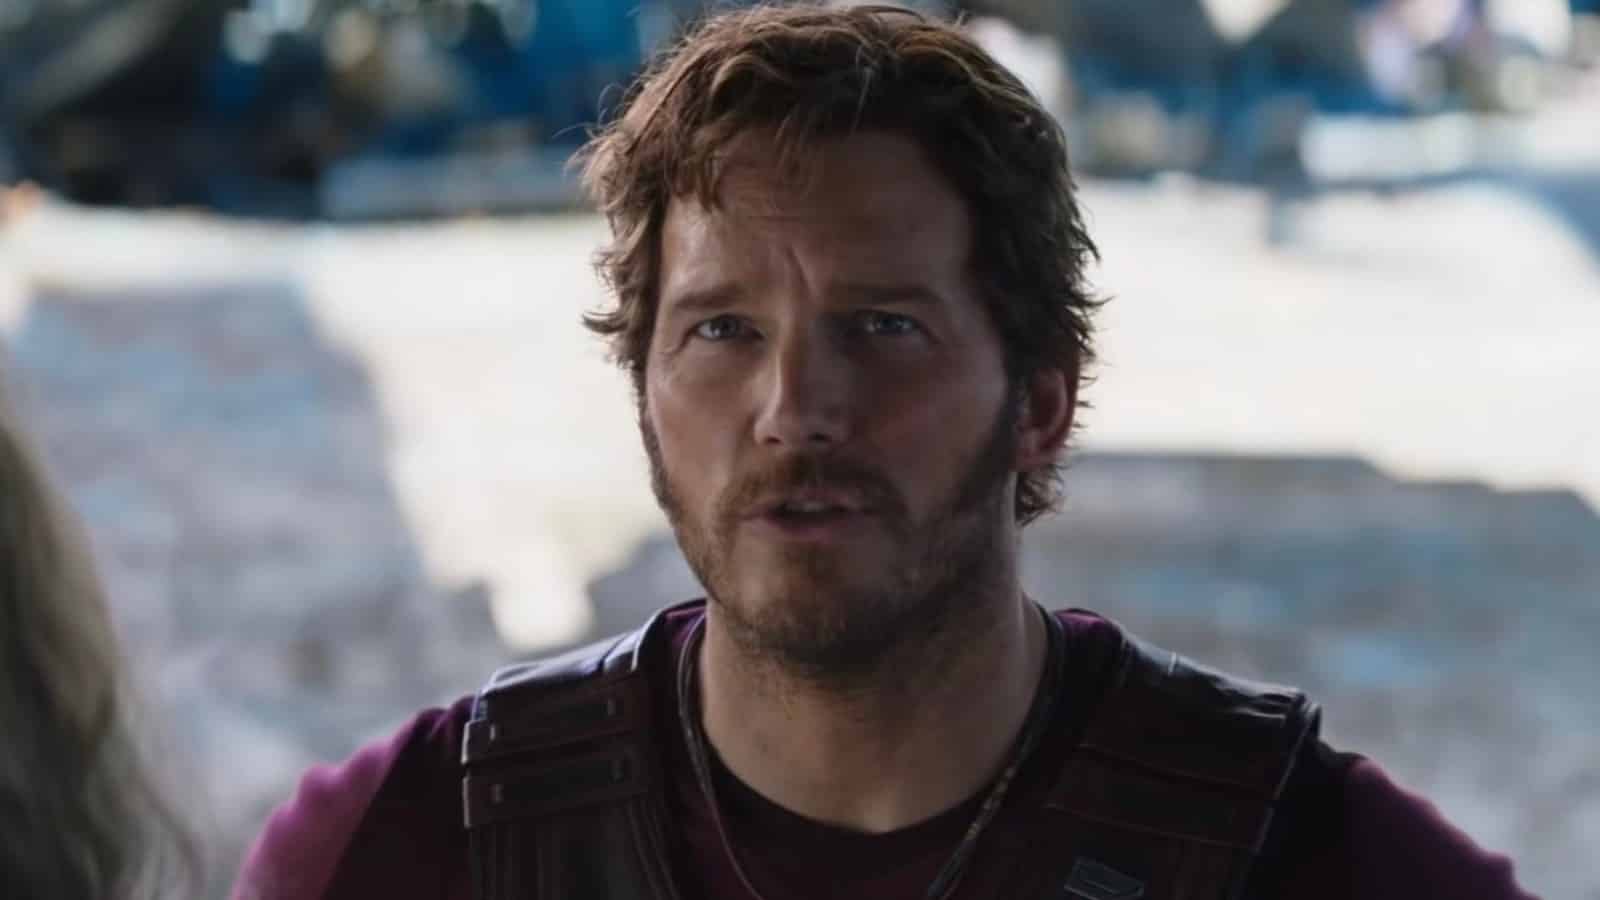 Chris Pratt in Thor: Love and Thunder, the next Phase Four movie of the Marvel Cinematic Universe.